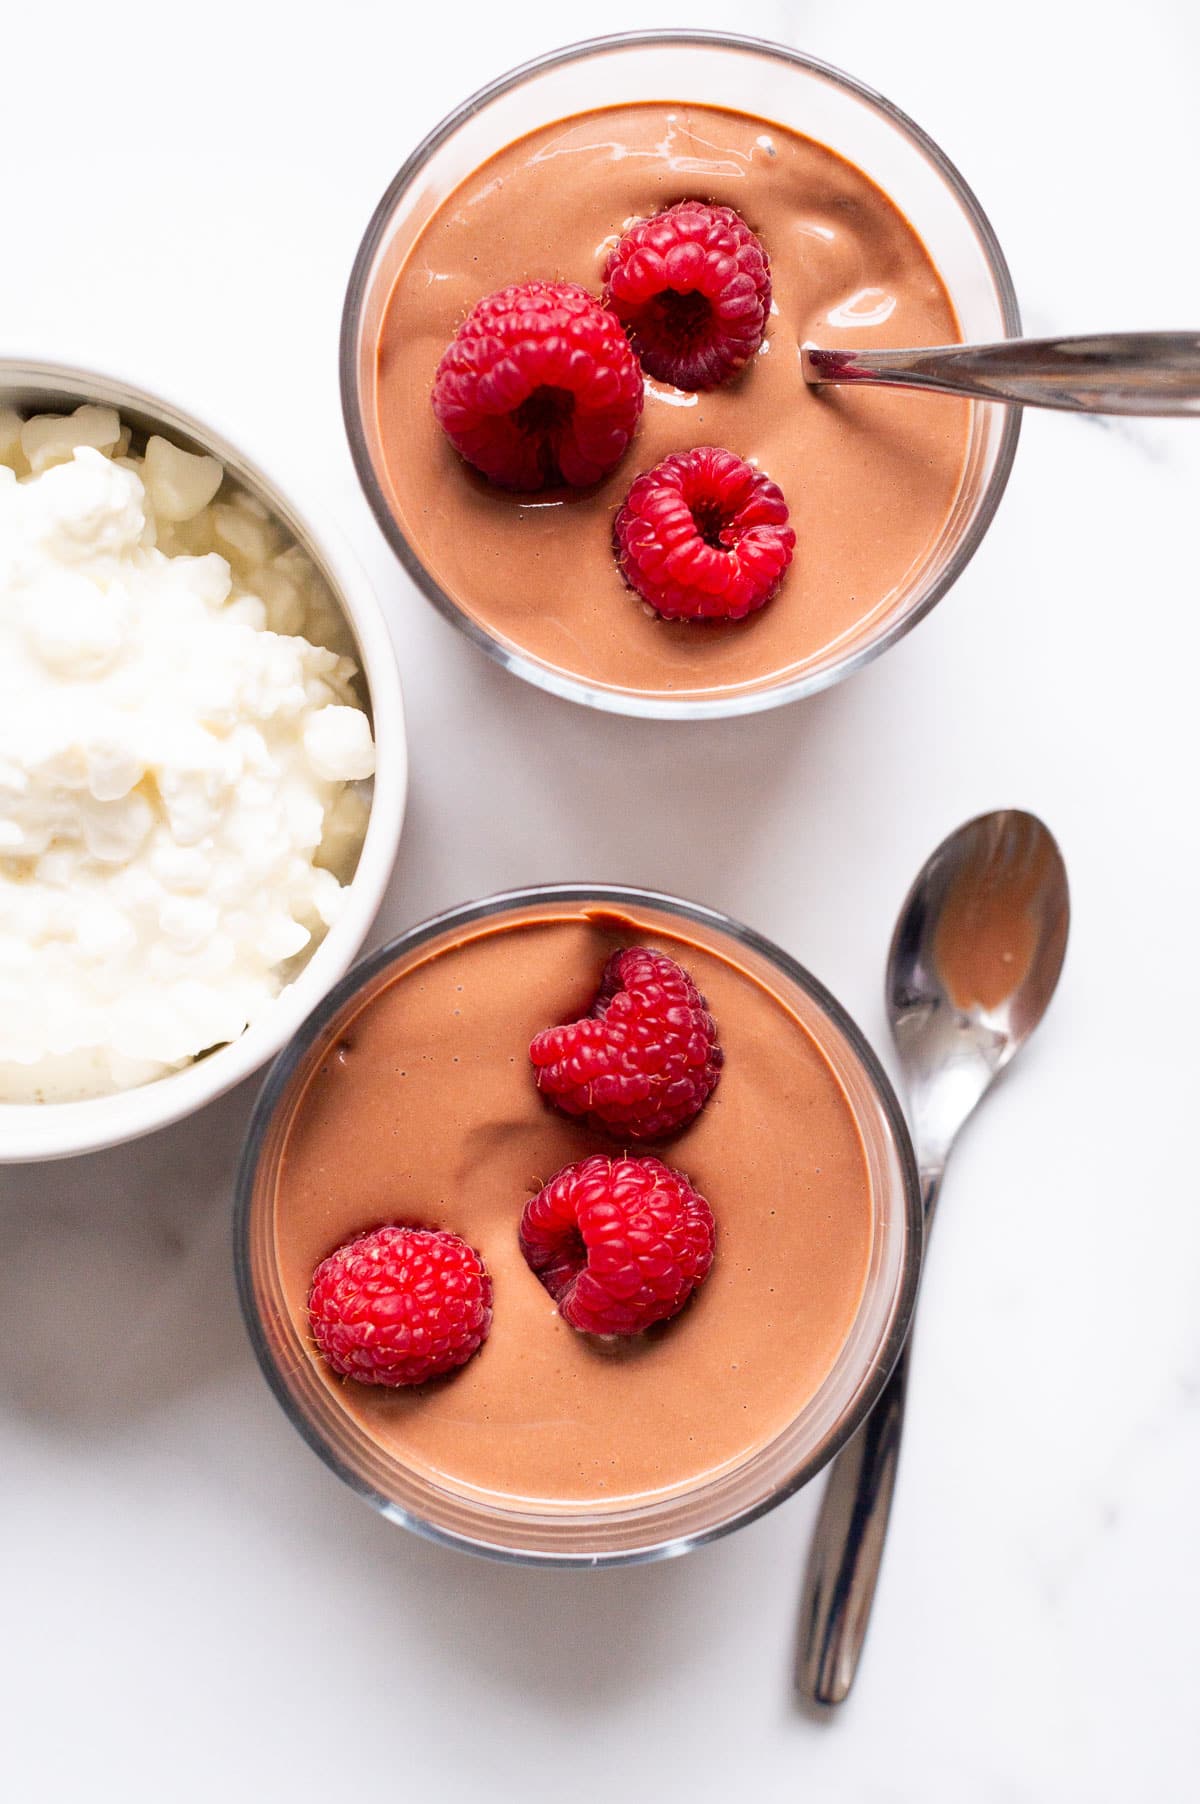 Cottage cheese chocolate pudding garnished with raspberries in small cups with spoons.